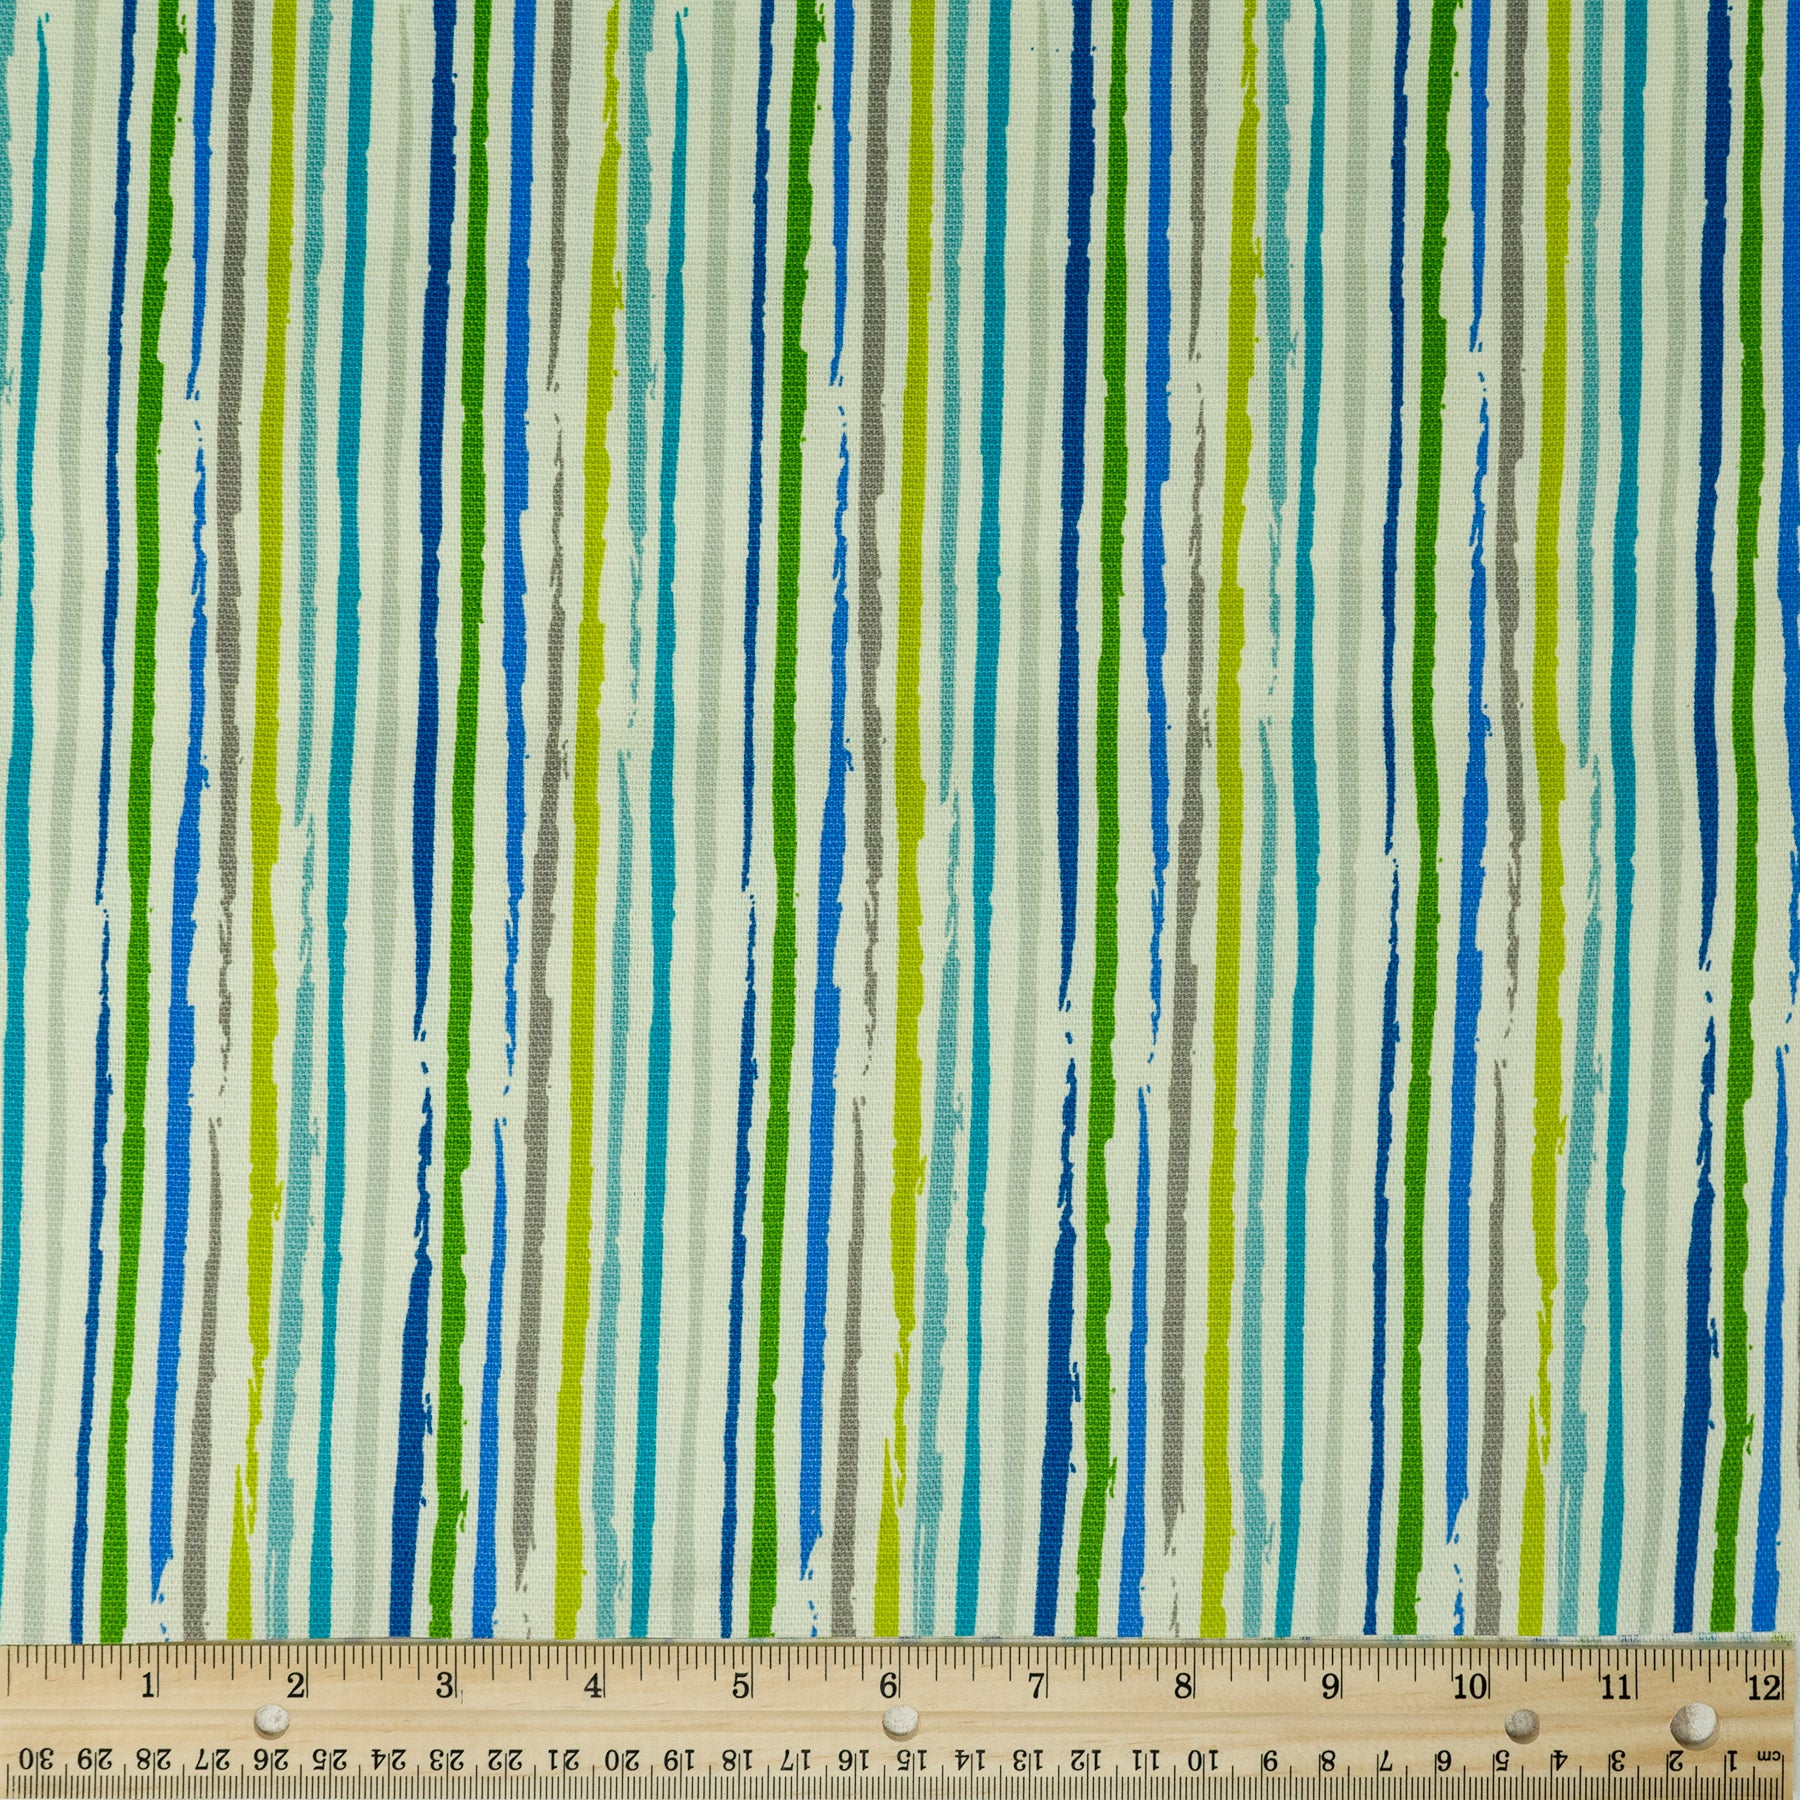 Waverly Inspirations 100% Cotton Duck 45" Width Mini Stripe Azure Color Sewing Fabric by the Yard